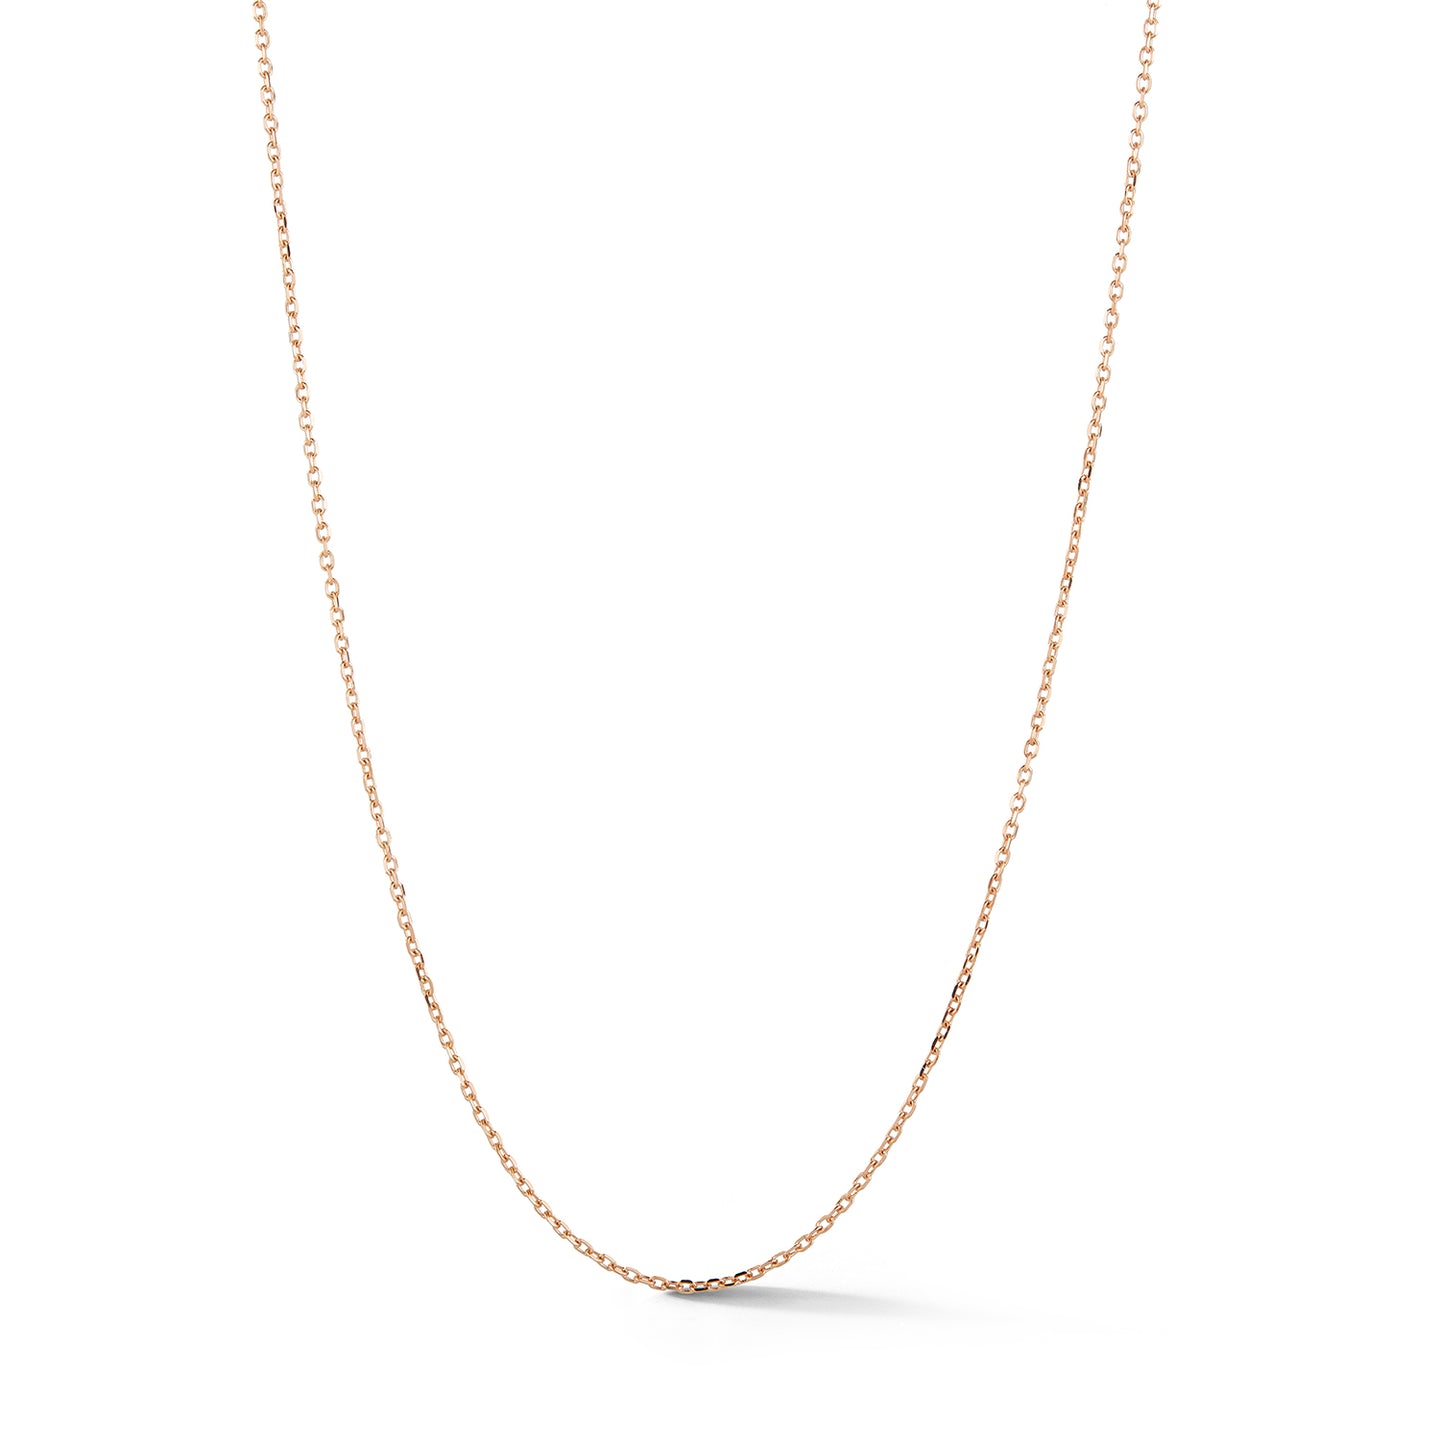 CHAIN 1 - 18K GOLD CHAIN LINK NECKLACE